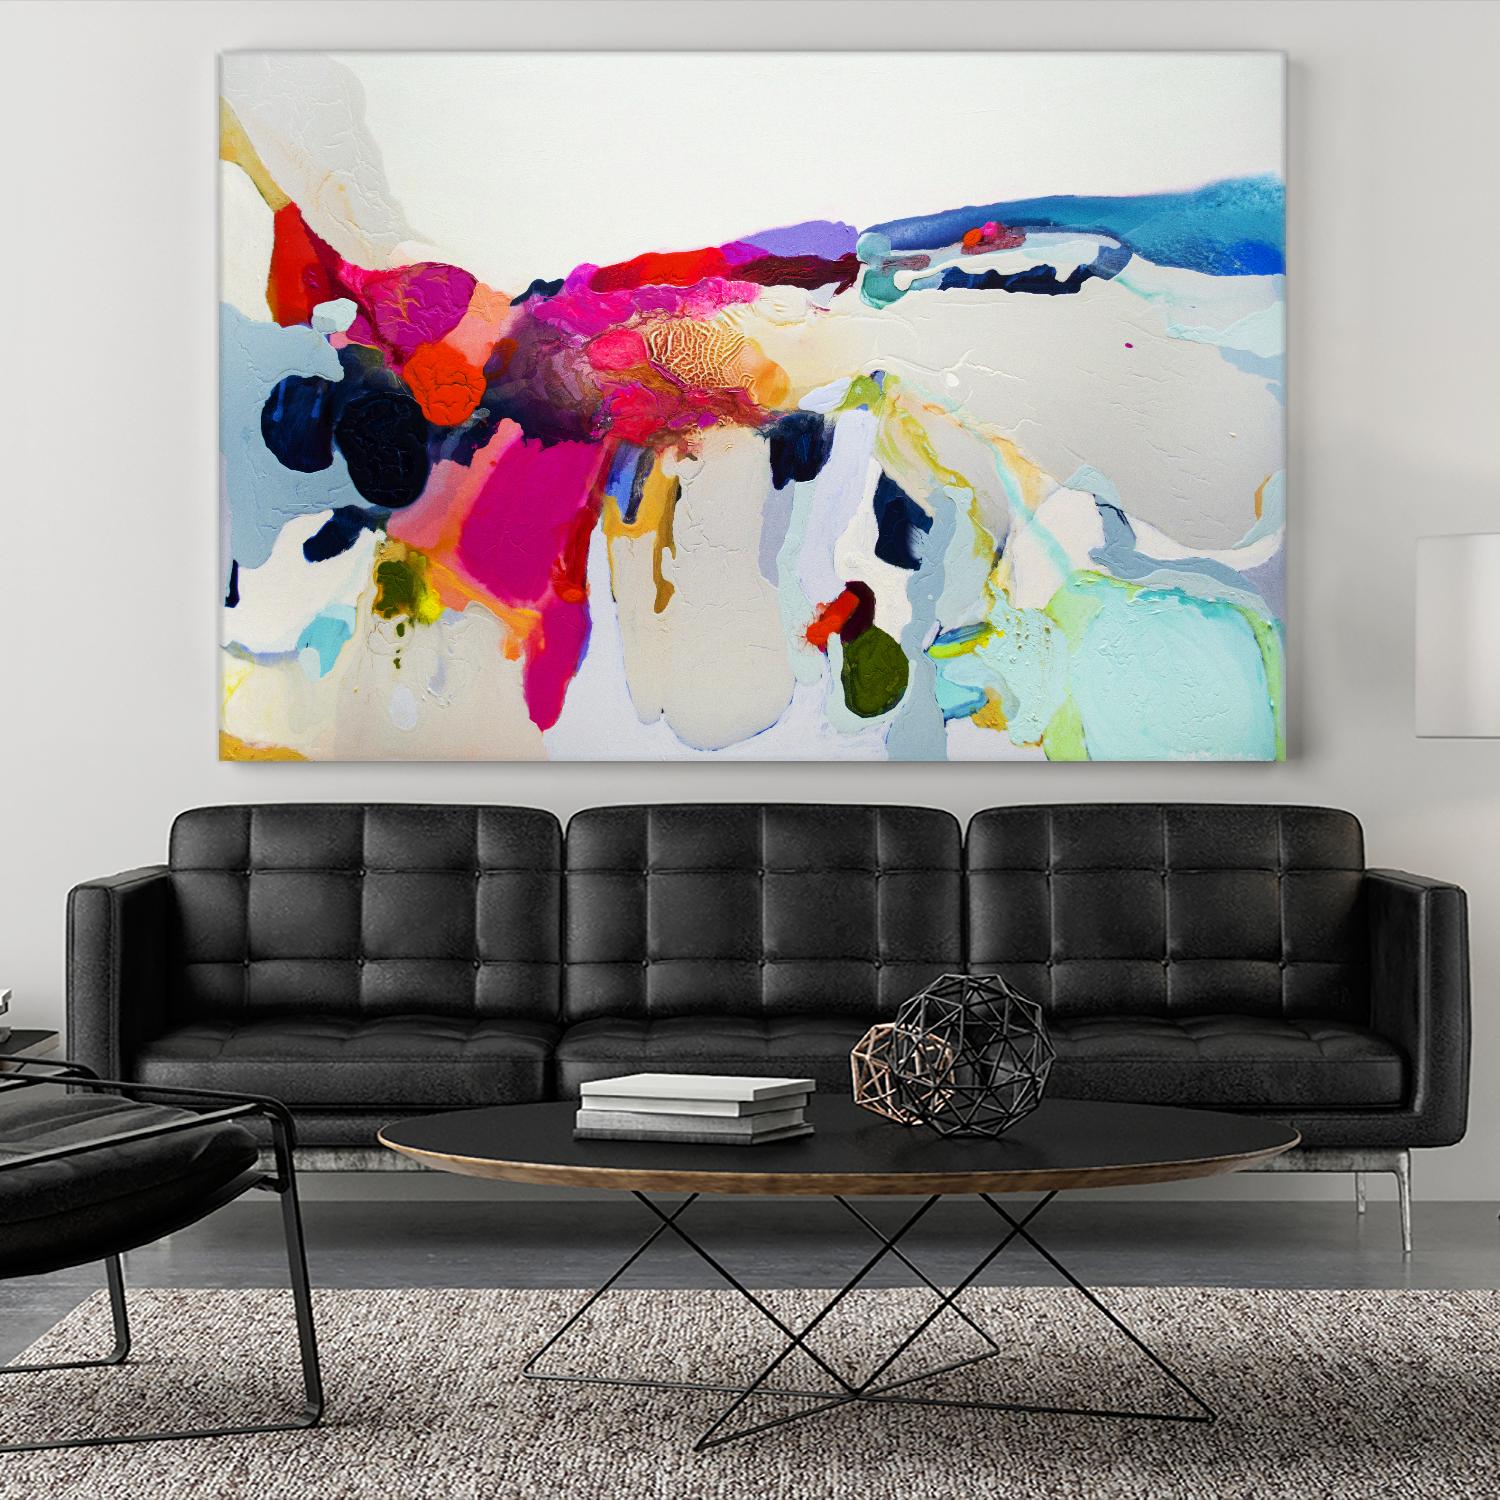 The Space in Between 39 by Claire Desjardins on Artfully Walls